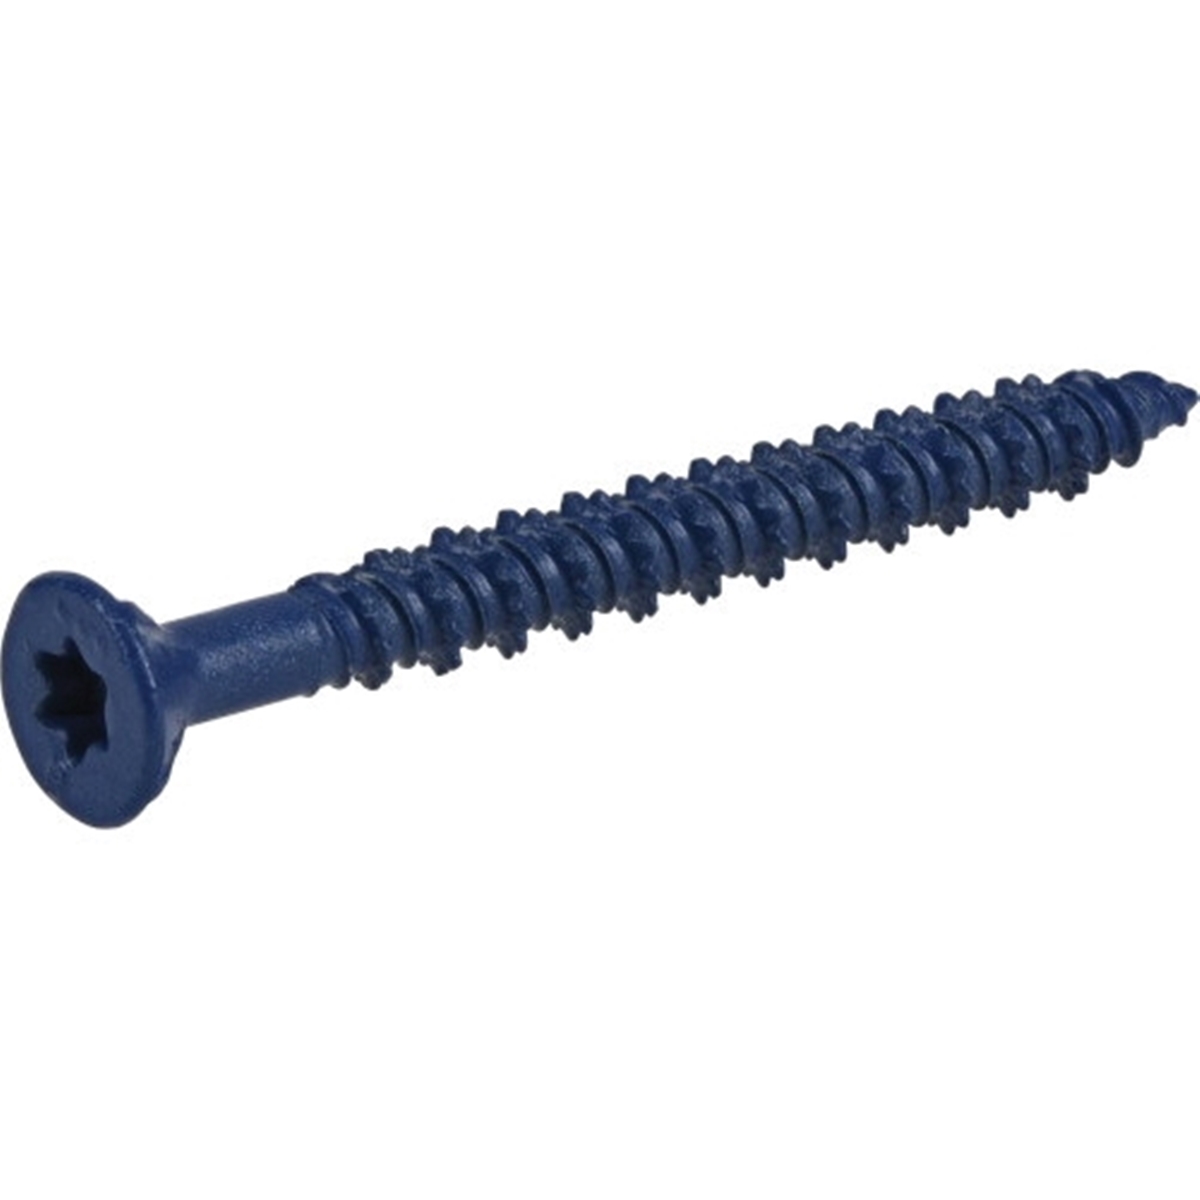 376524 Concrete Screw Anchor, 3/16 in Dia, 2-1/4 in L, Carbon Steel, Epoxy-Coated, 100/PK